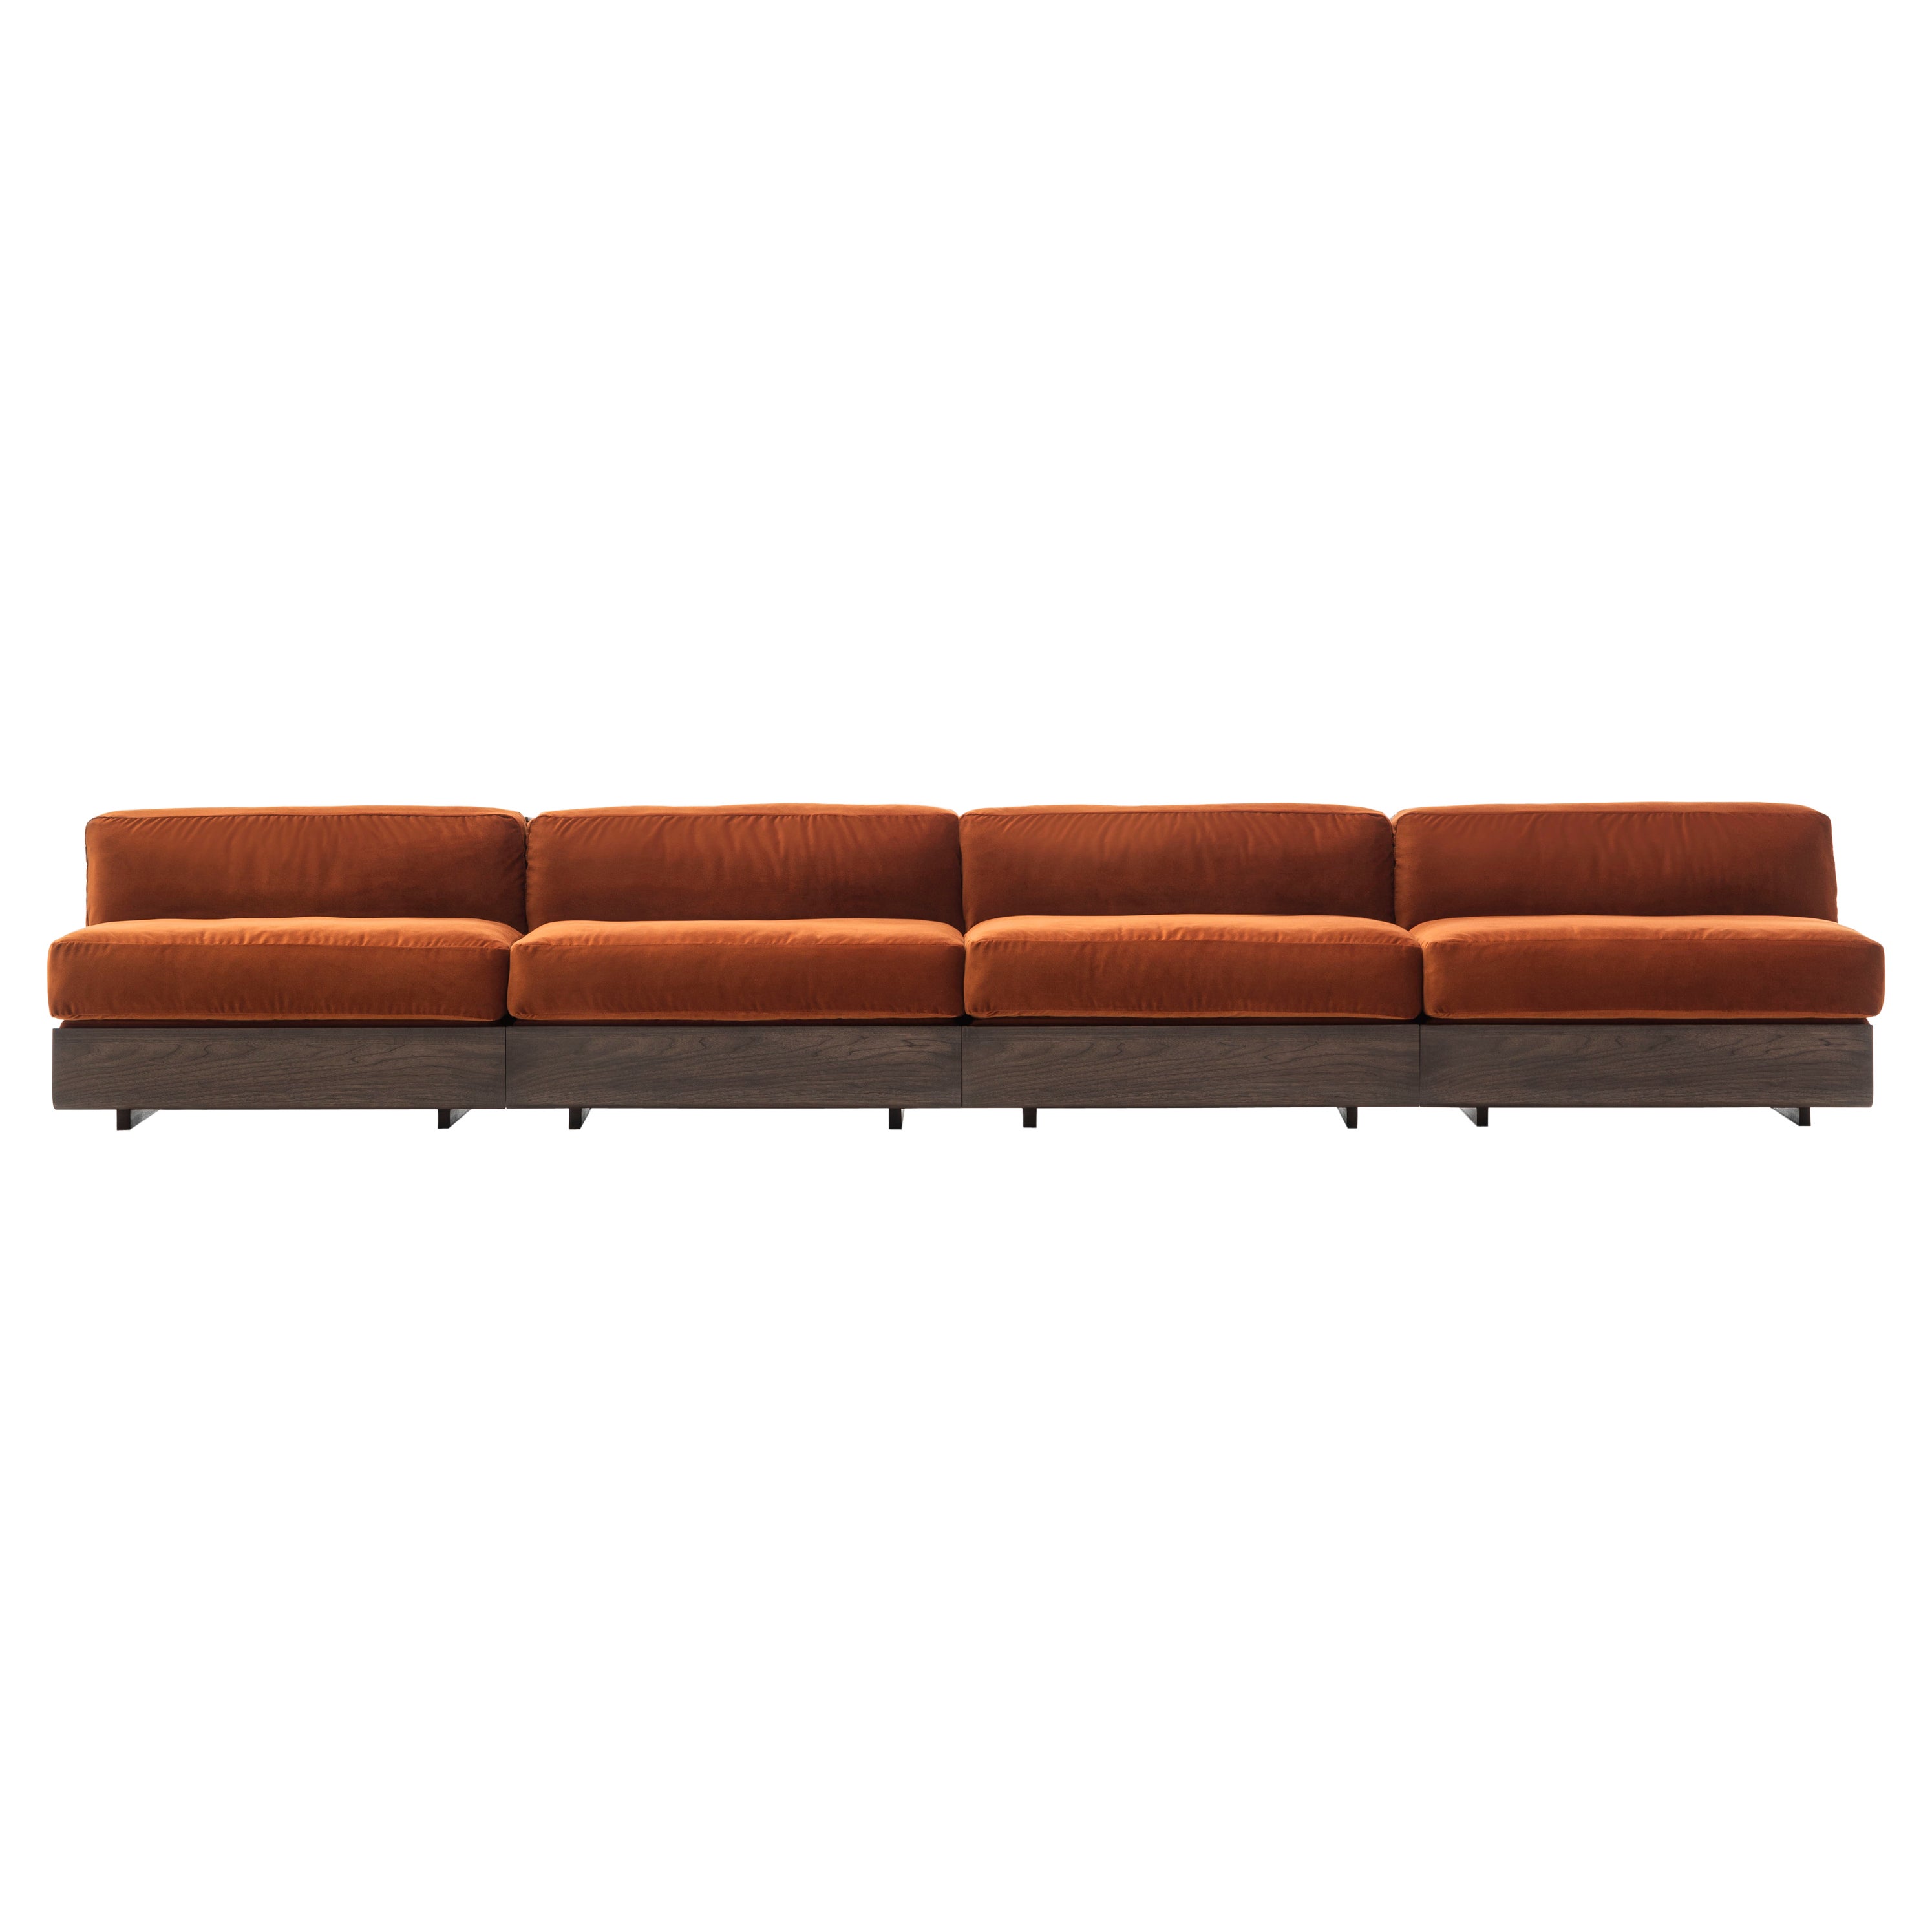 Acerbis Life Sofa in Brown Upholstery with Dark Stained Walnut Frame